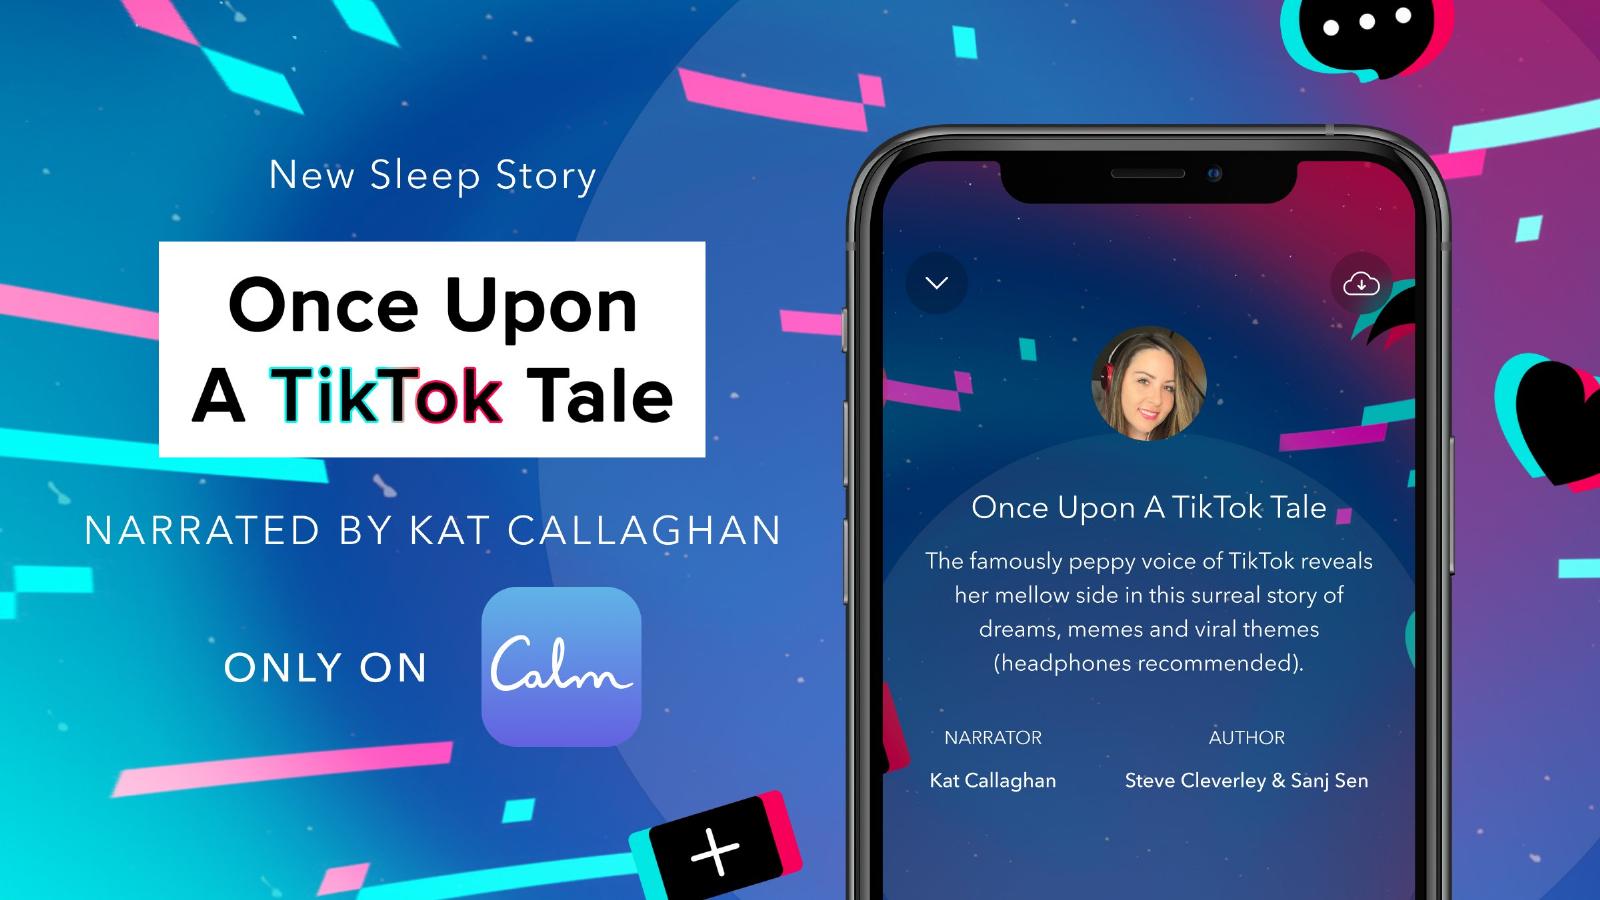 Calm’s new Sleep Story is narrated by TikTok’s text-to-speech voice artist